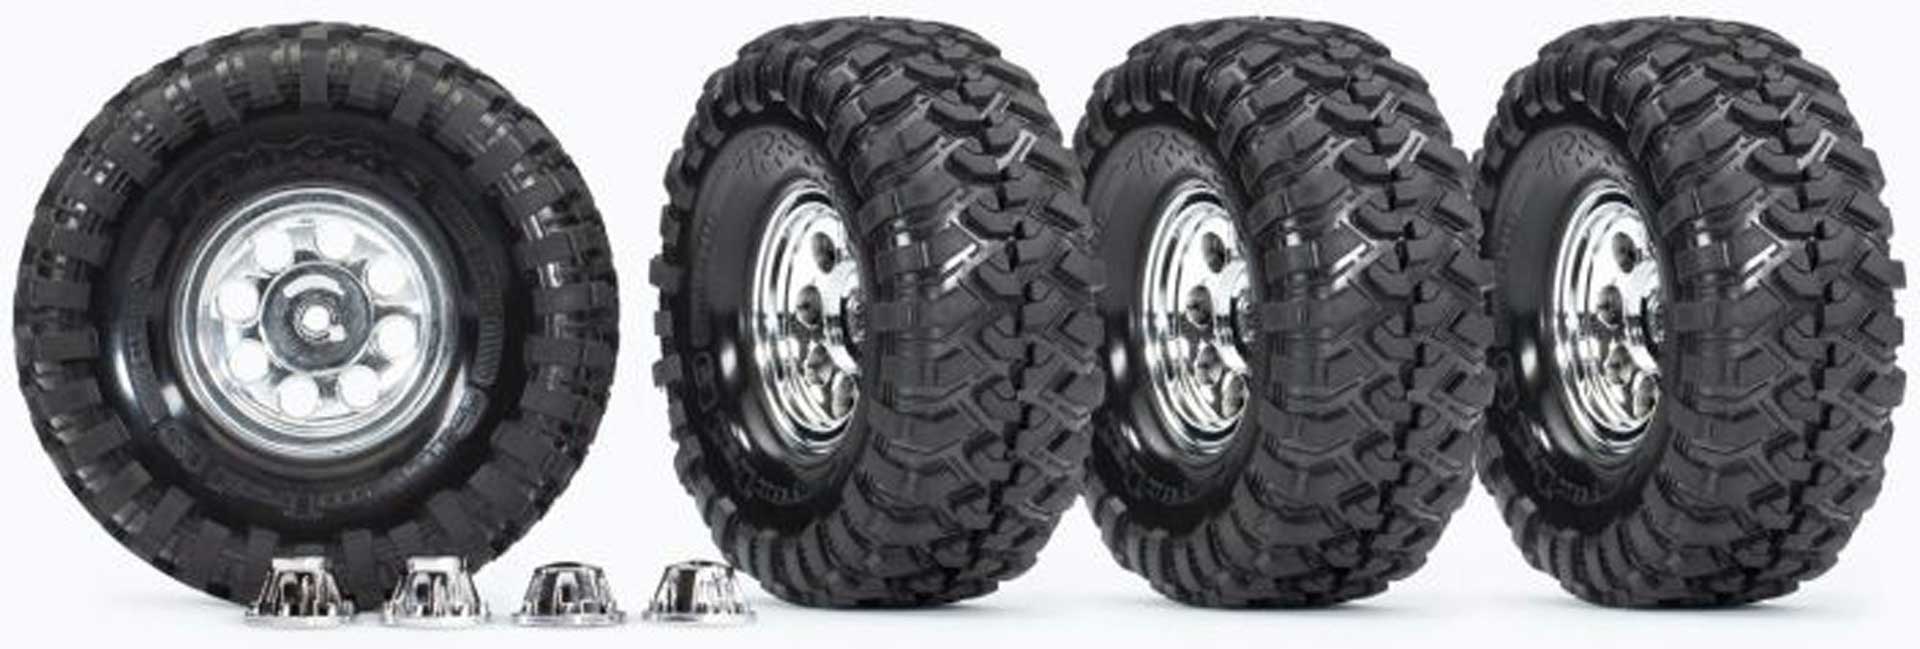 TRAXXAS tyres on Classic-Chrome rim Canyon Trail 4.6x1.9 (4stk) (for 8255A axle)